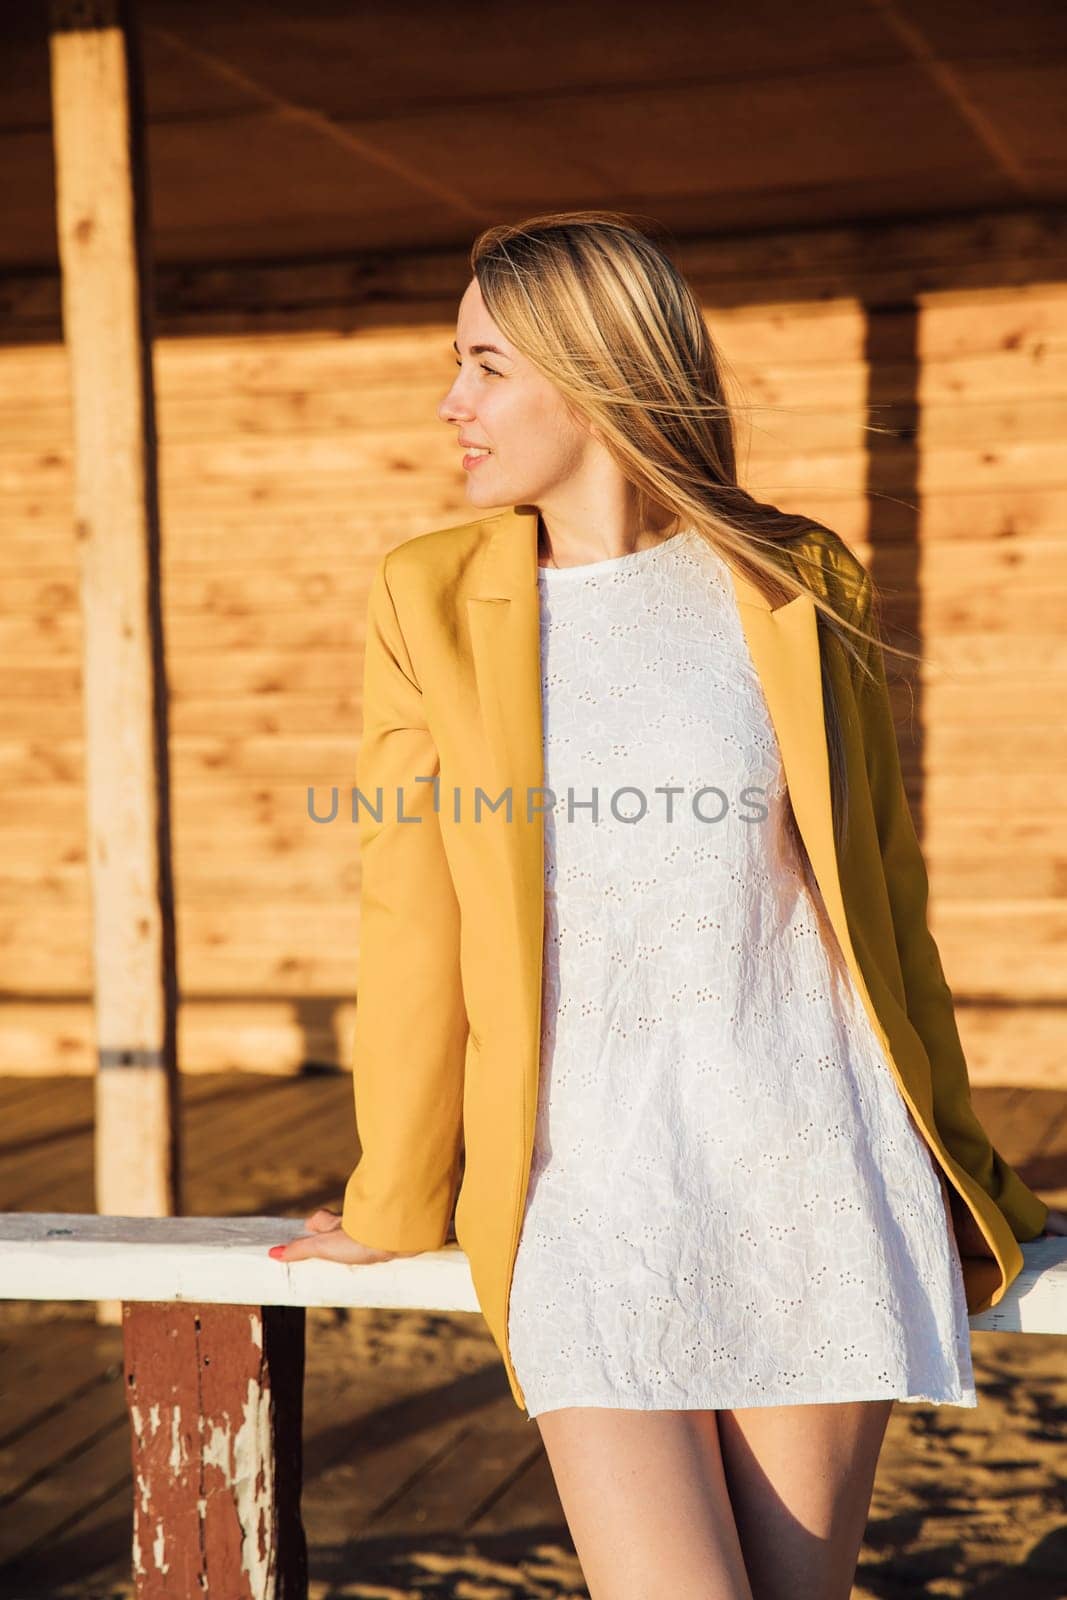 beautiful blonde woman in a light summer dress and yellow jacket